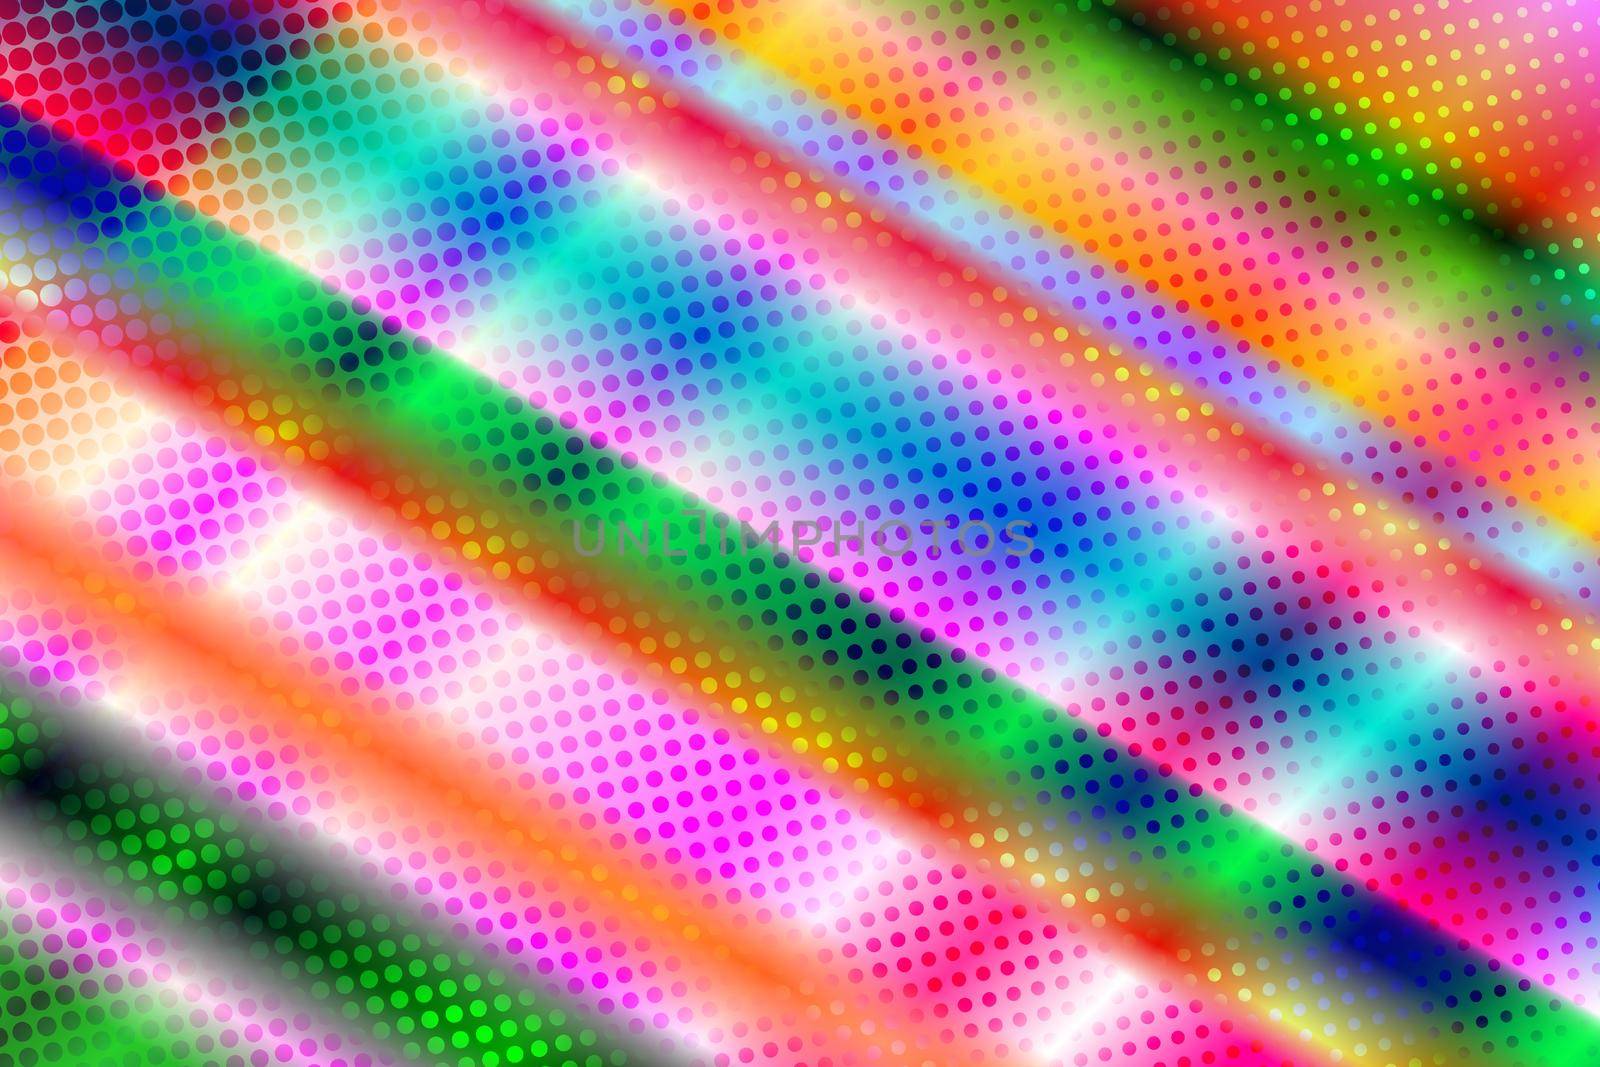 Futuristic abstract colorful geometric background. Creative illustration in halftone style with rainbow gradient. Pattern for wallpaper, web page, banner